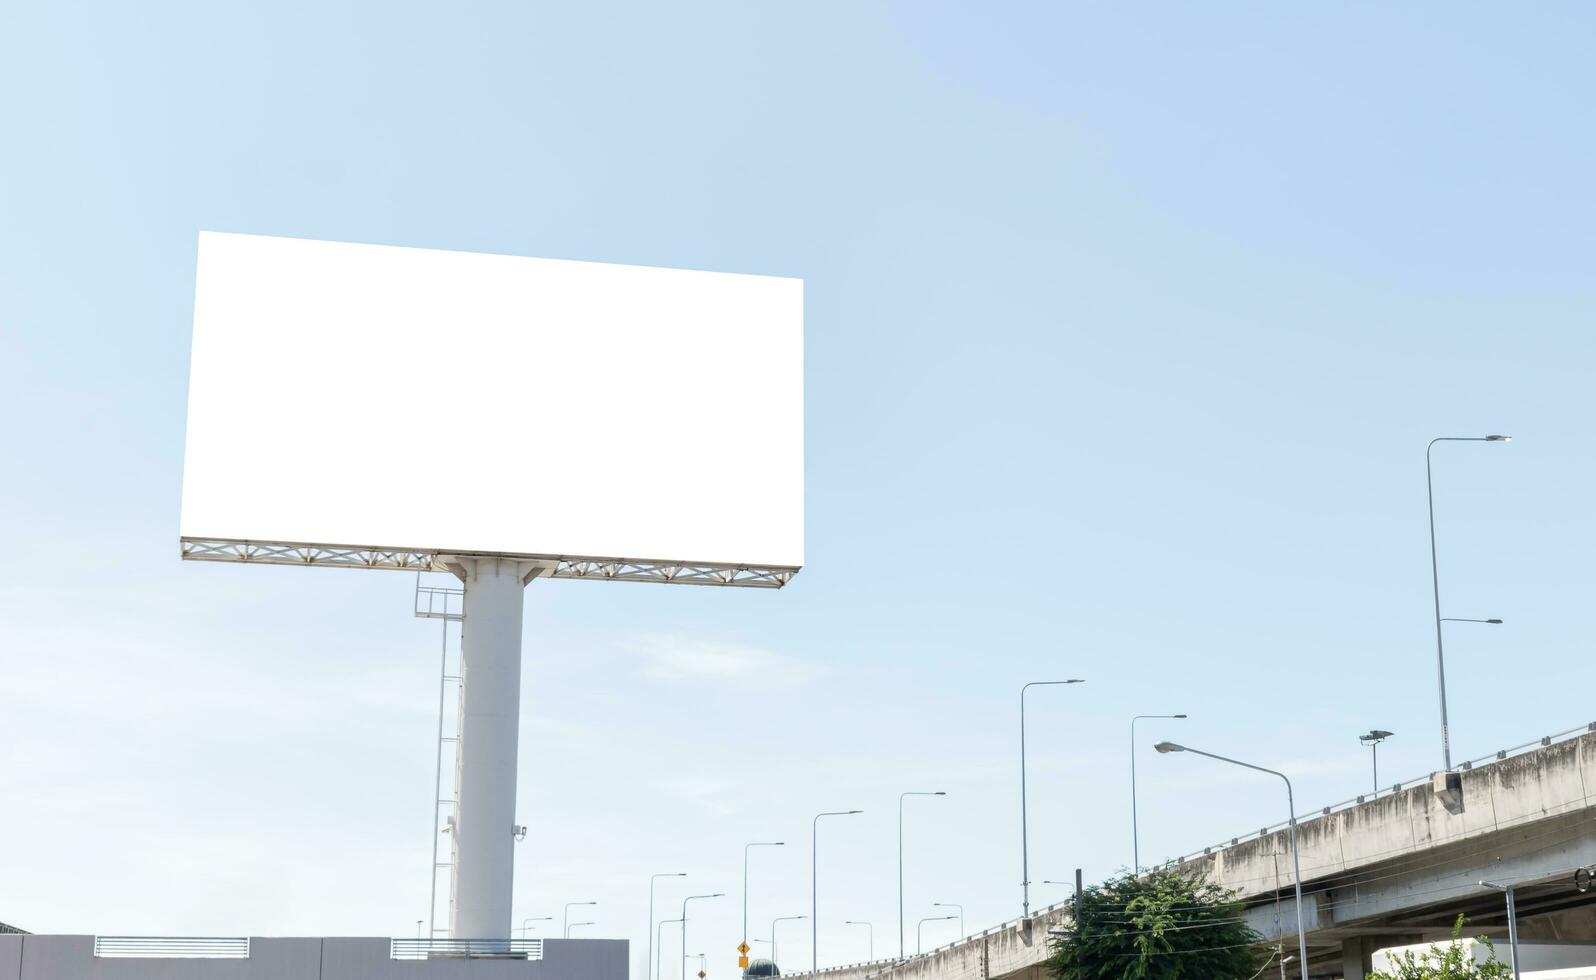 Pole outdoor billboard with blue sky background. Clipping path for mockup white screen photo